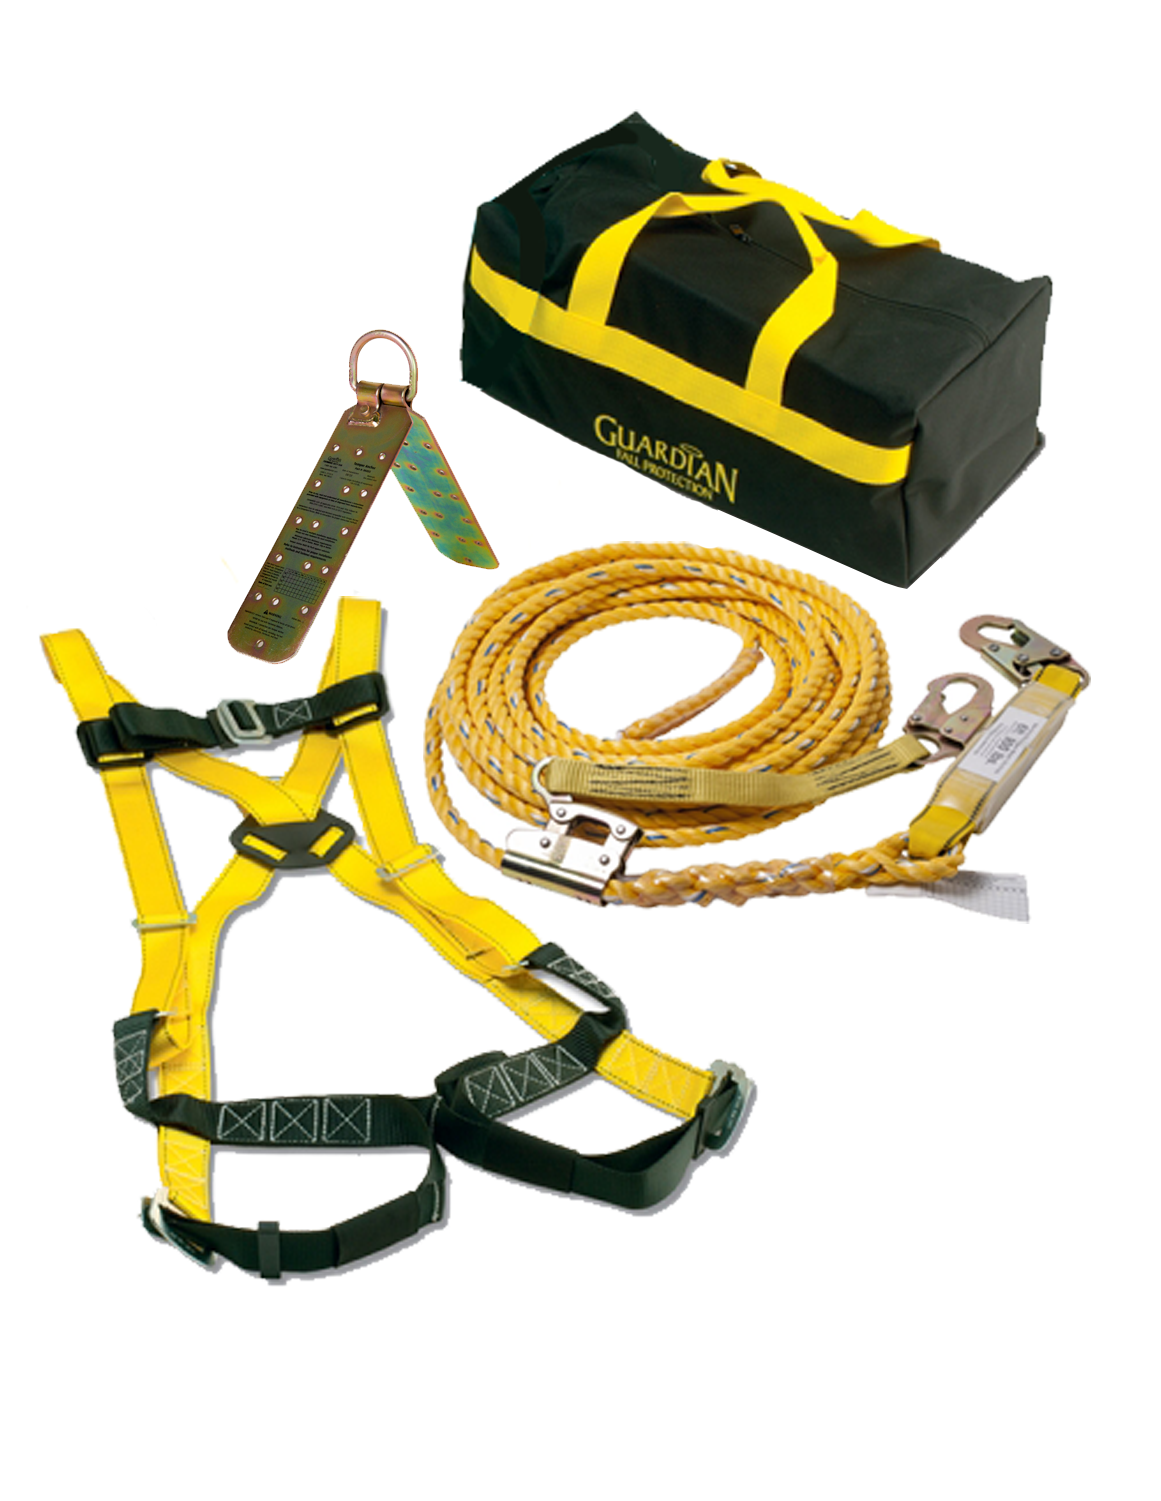 https://www.engineeredfallprotection.com/store/images/thumbs/0001920_guardian-sack-of-safety-w-50-ft-vertical-lifeline-assembly-00735.png